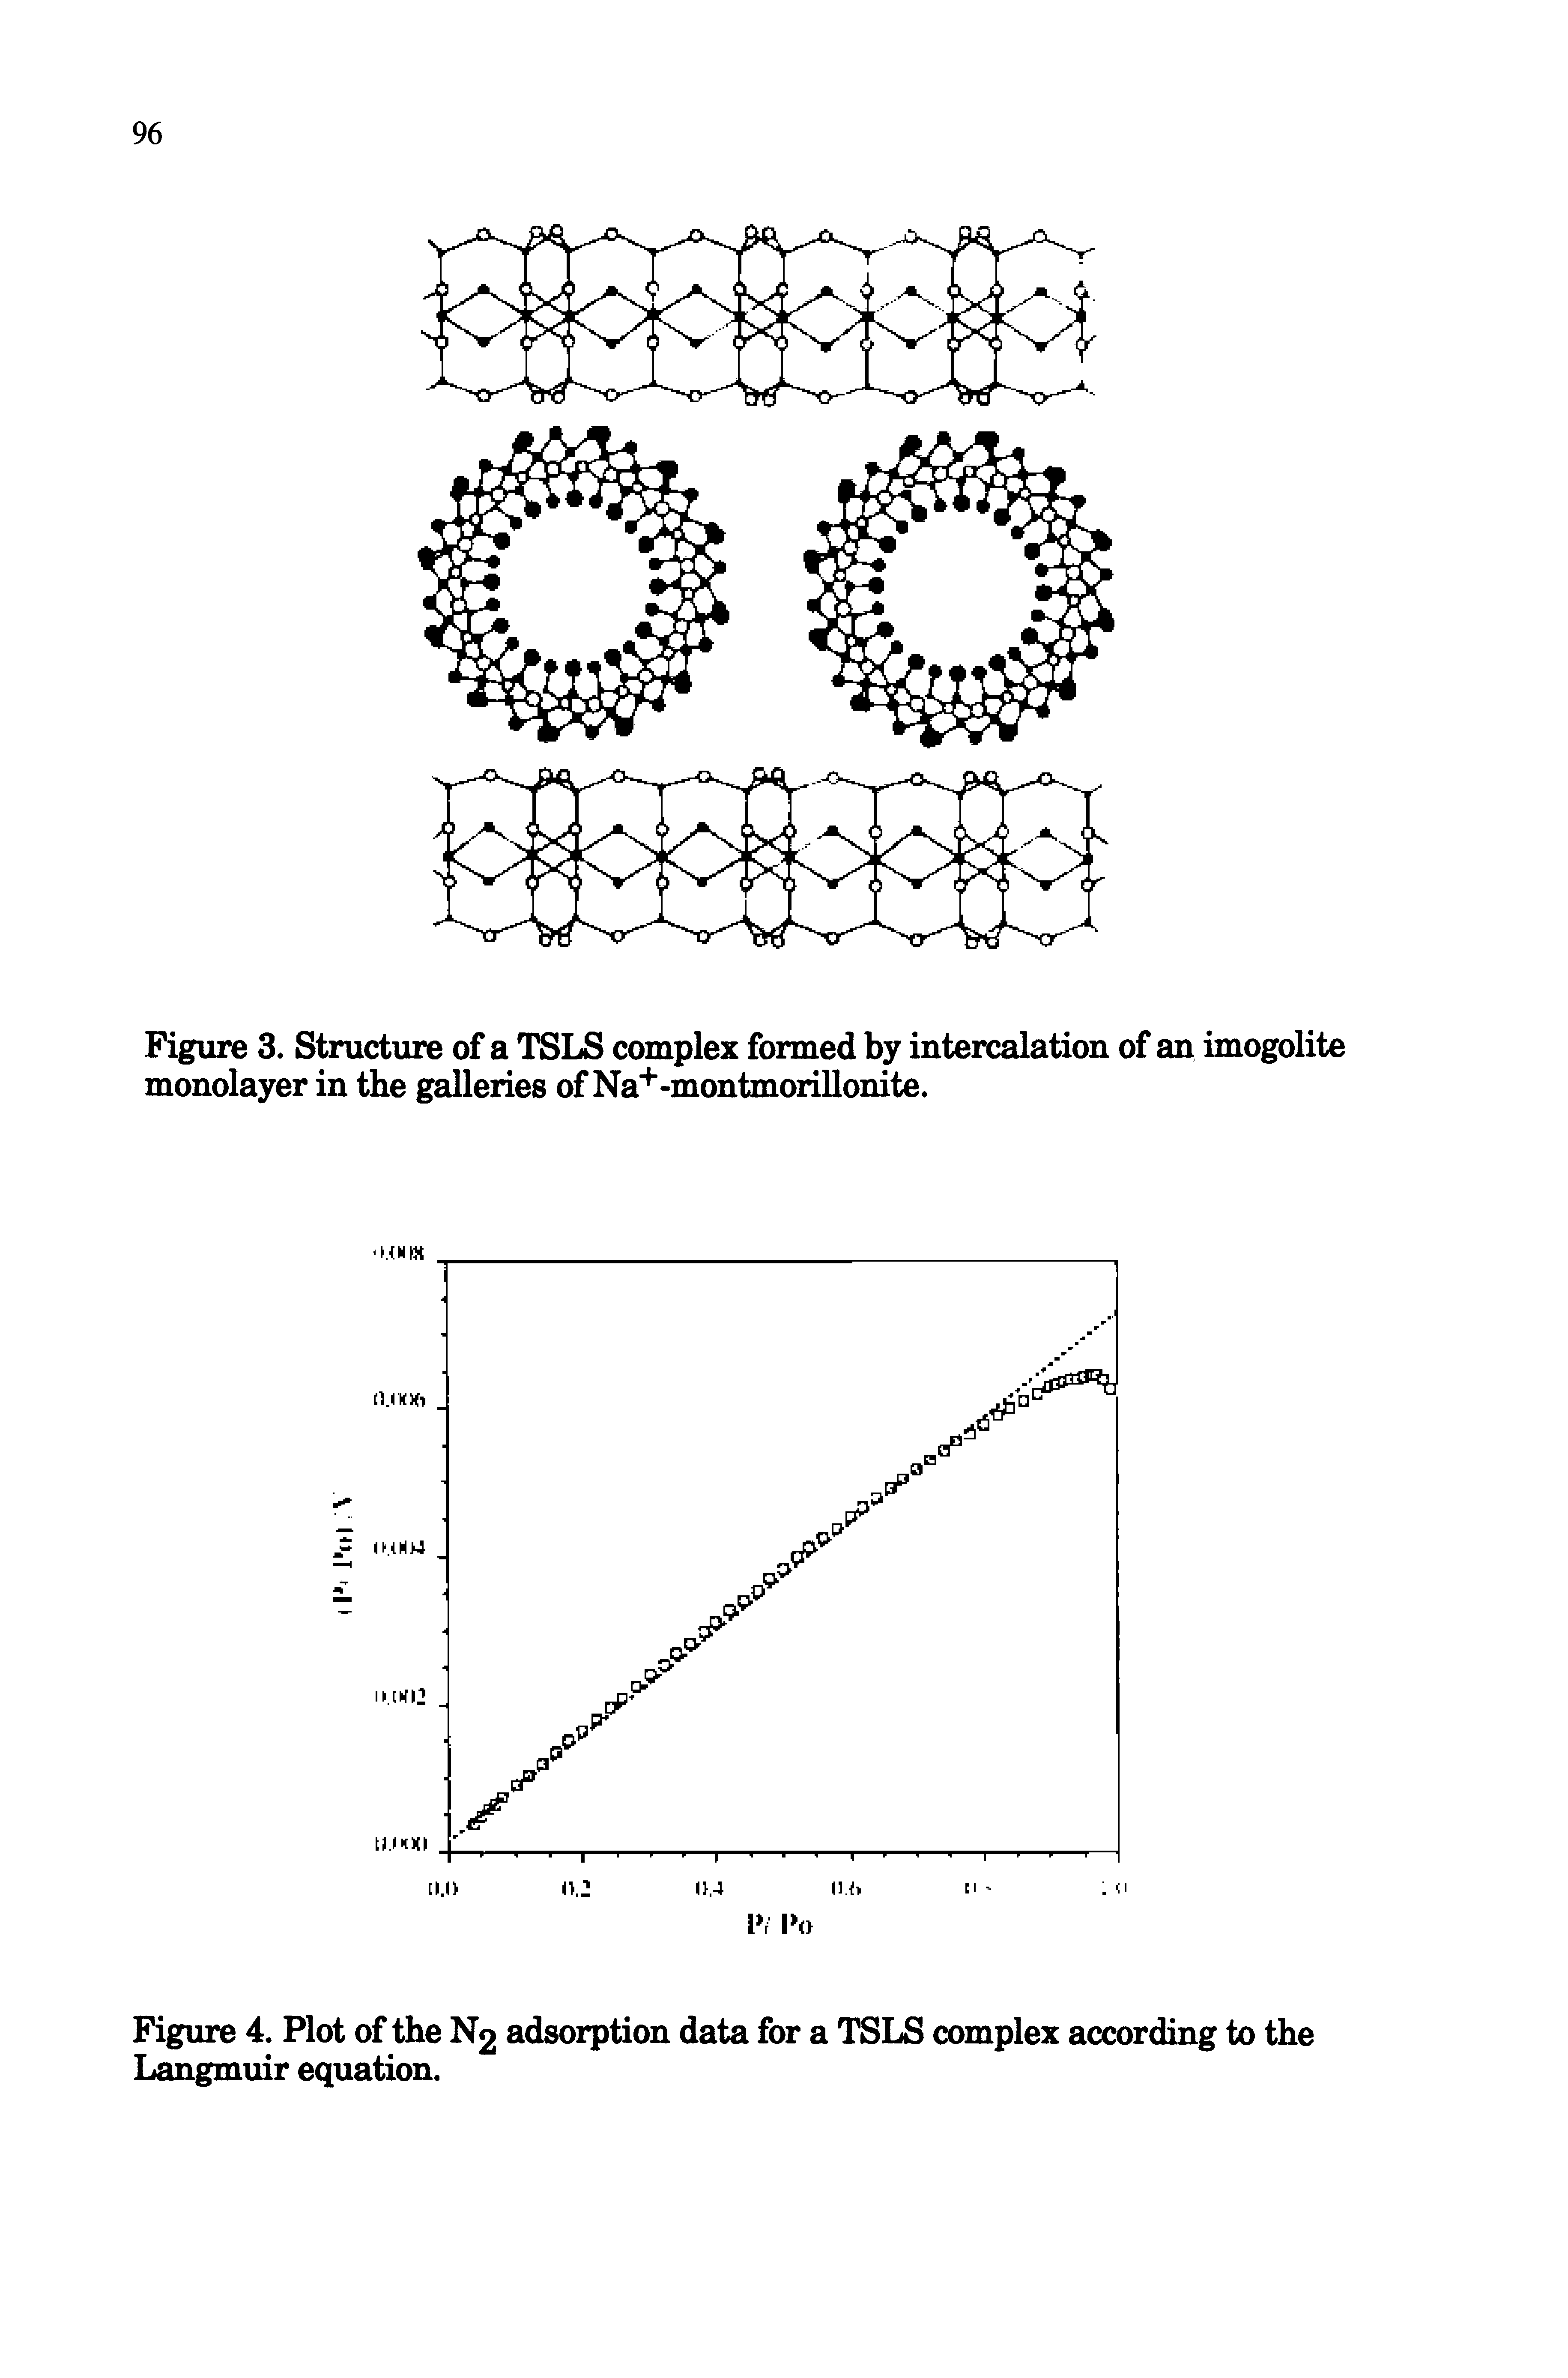 Figure 4. Plot of the N2 adsorption data for a TSLS complex according to the Langmuir equation.